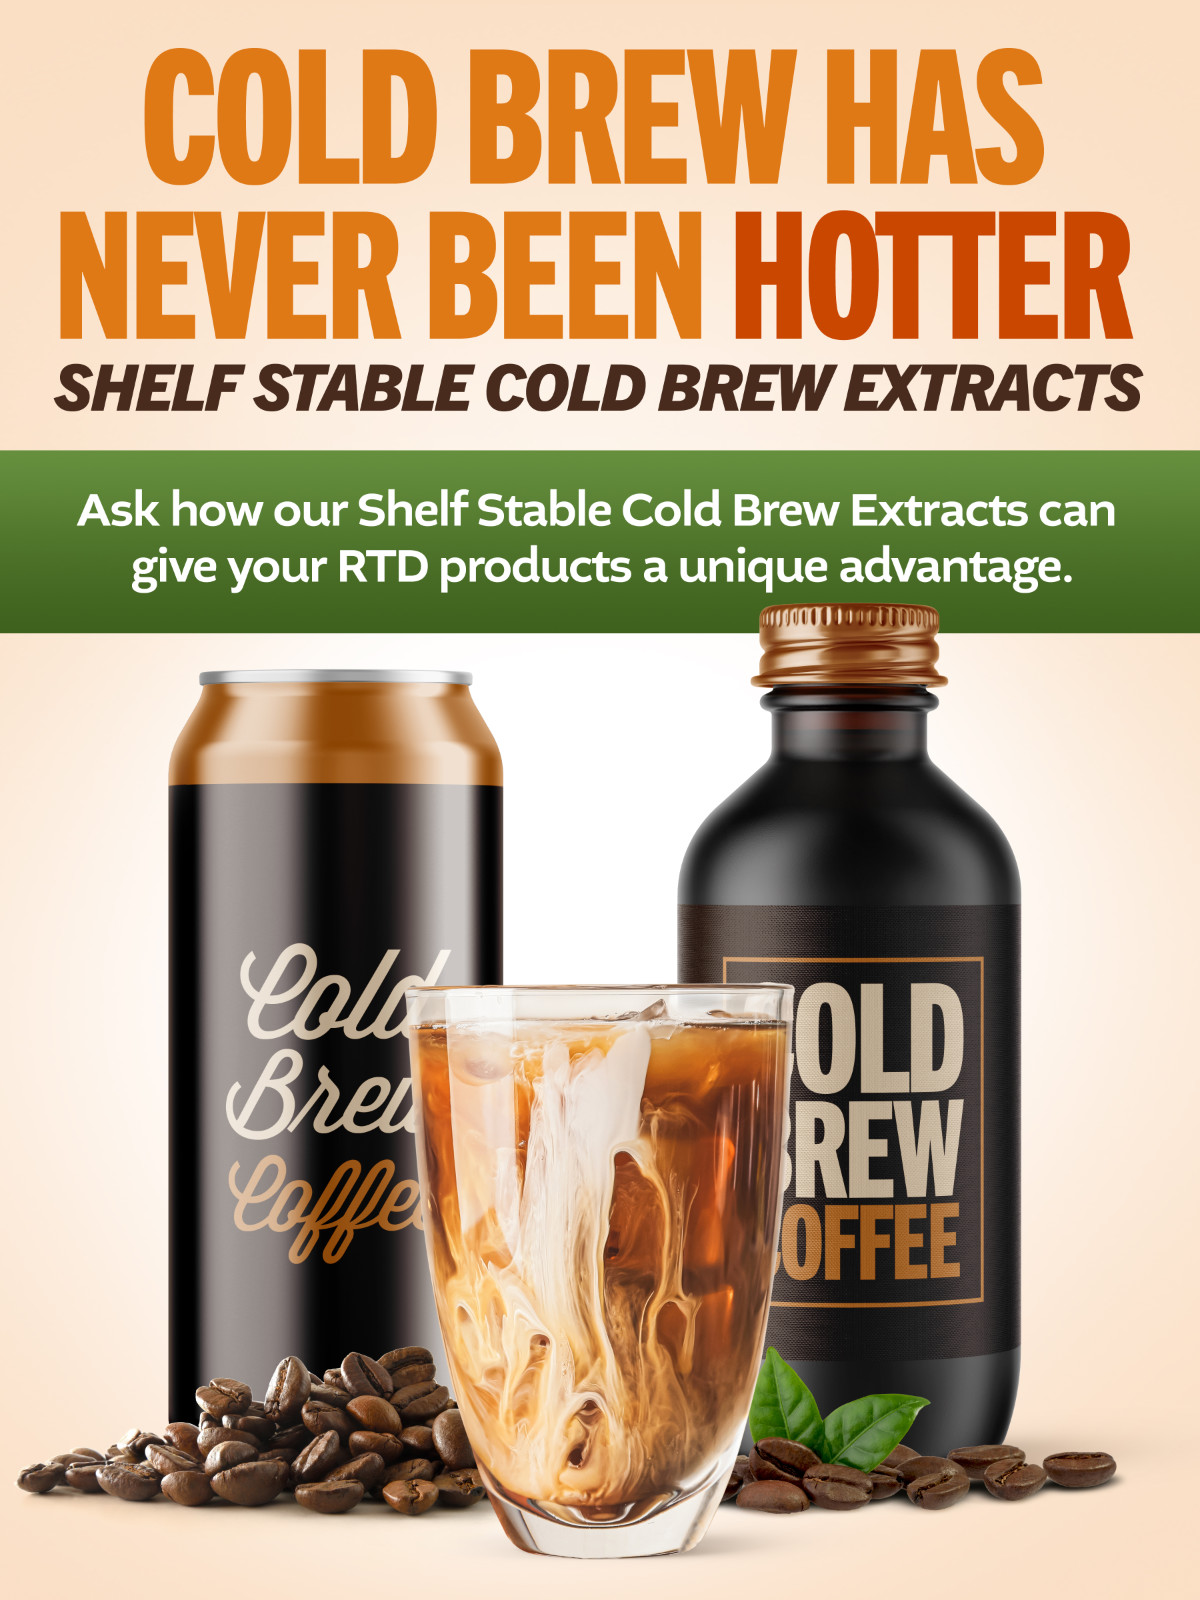 Cold Brew Has Never Been Hotter - Ask how our Shelf Stable Cold Brew Extracts can give your RTD products a unique advantage.